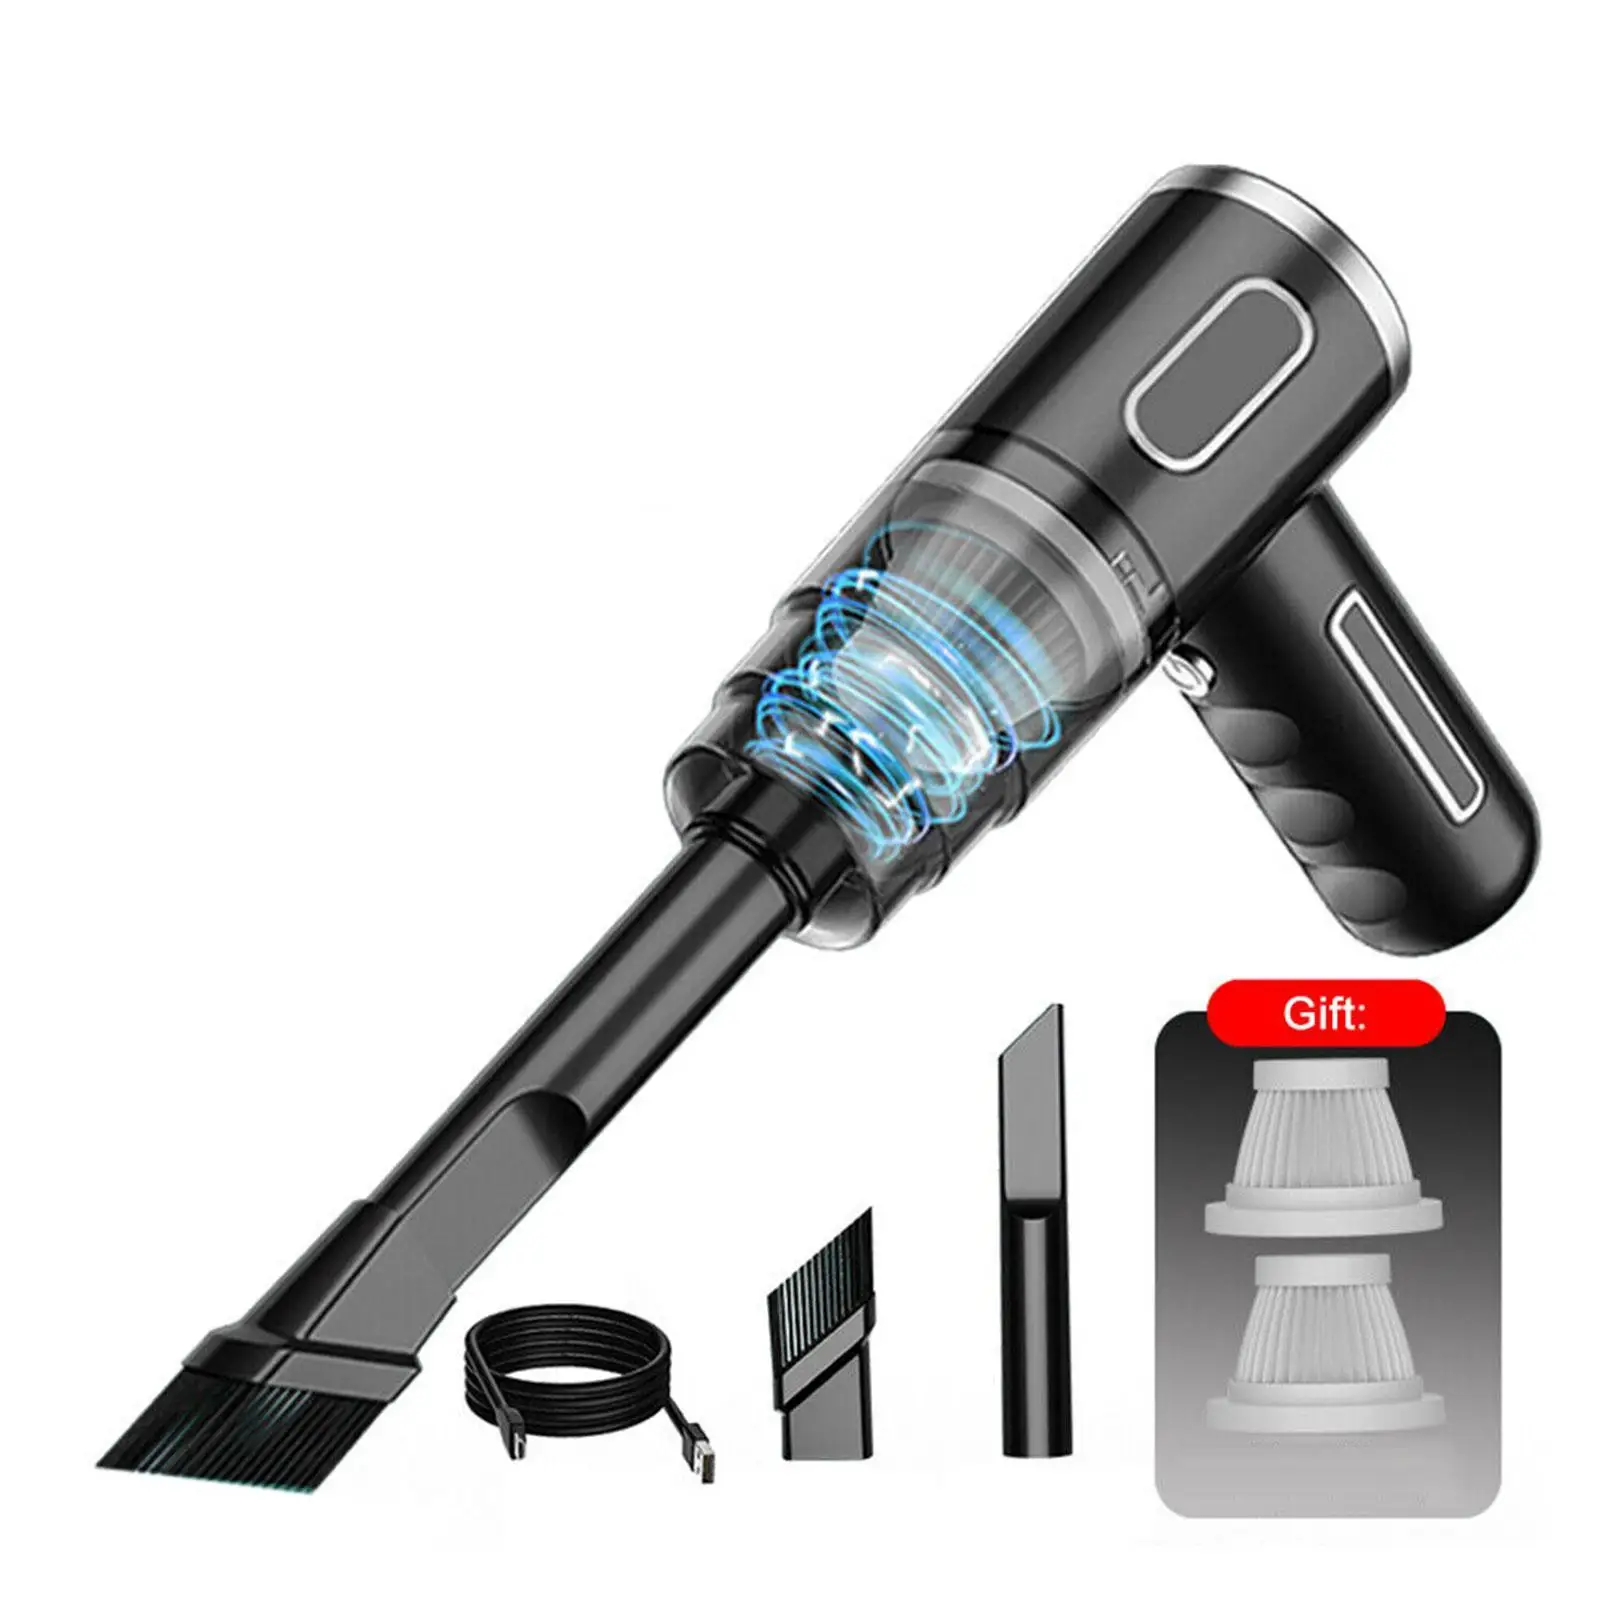 

5000PA 120W Cordless Mini Car Vacuum Cleaner Portable Household Dual-Use Wet Dry Vacuums Cleaner USB Rechargable Handheld